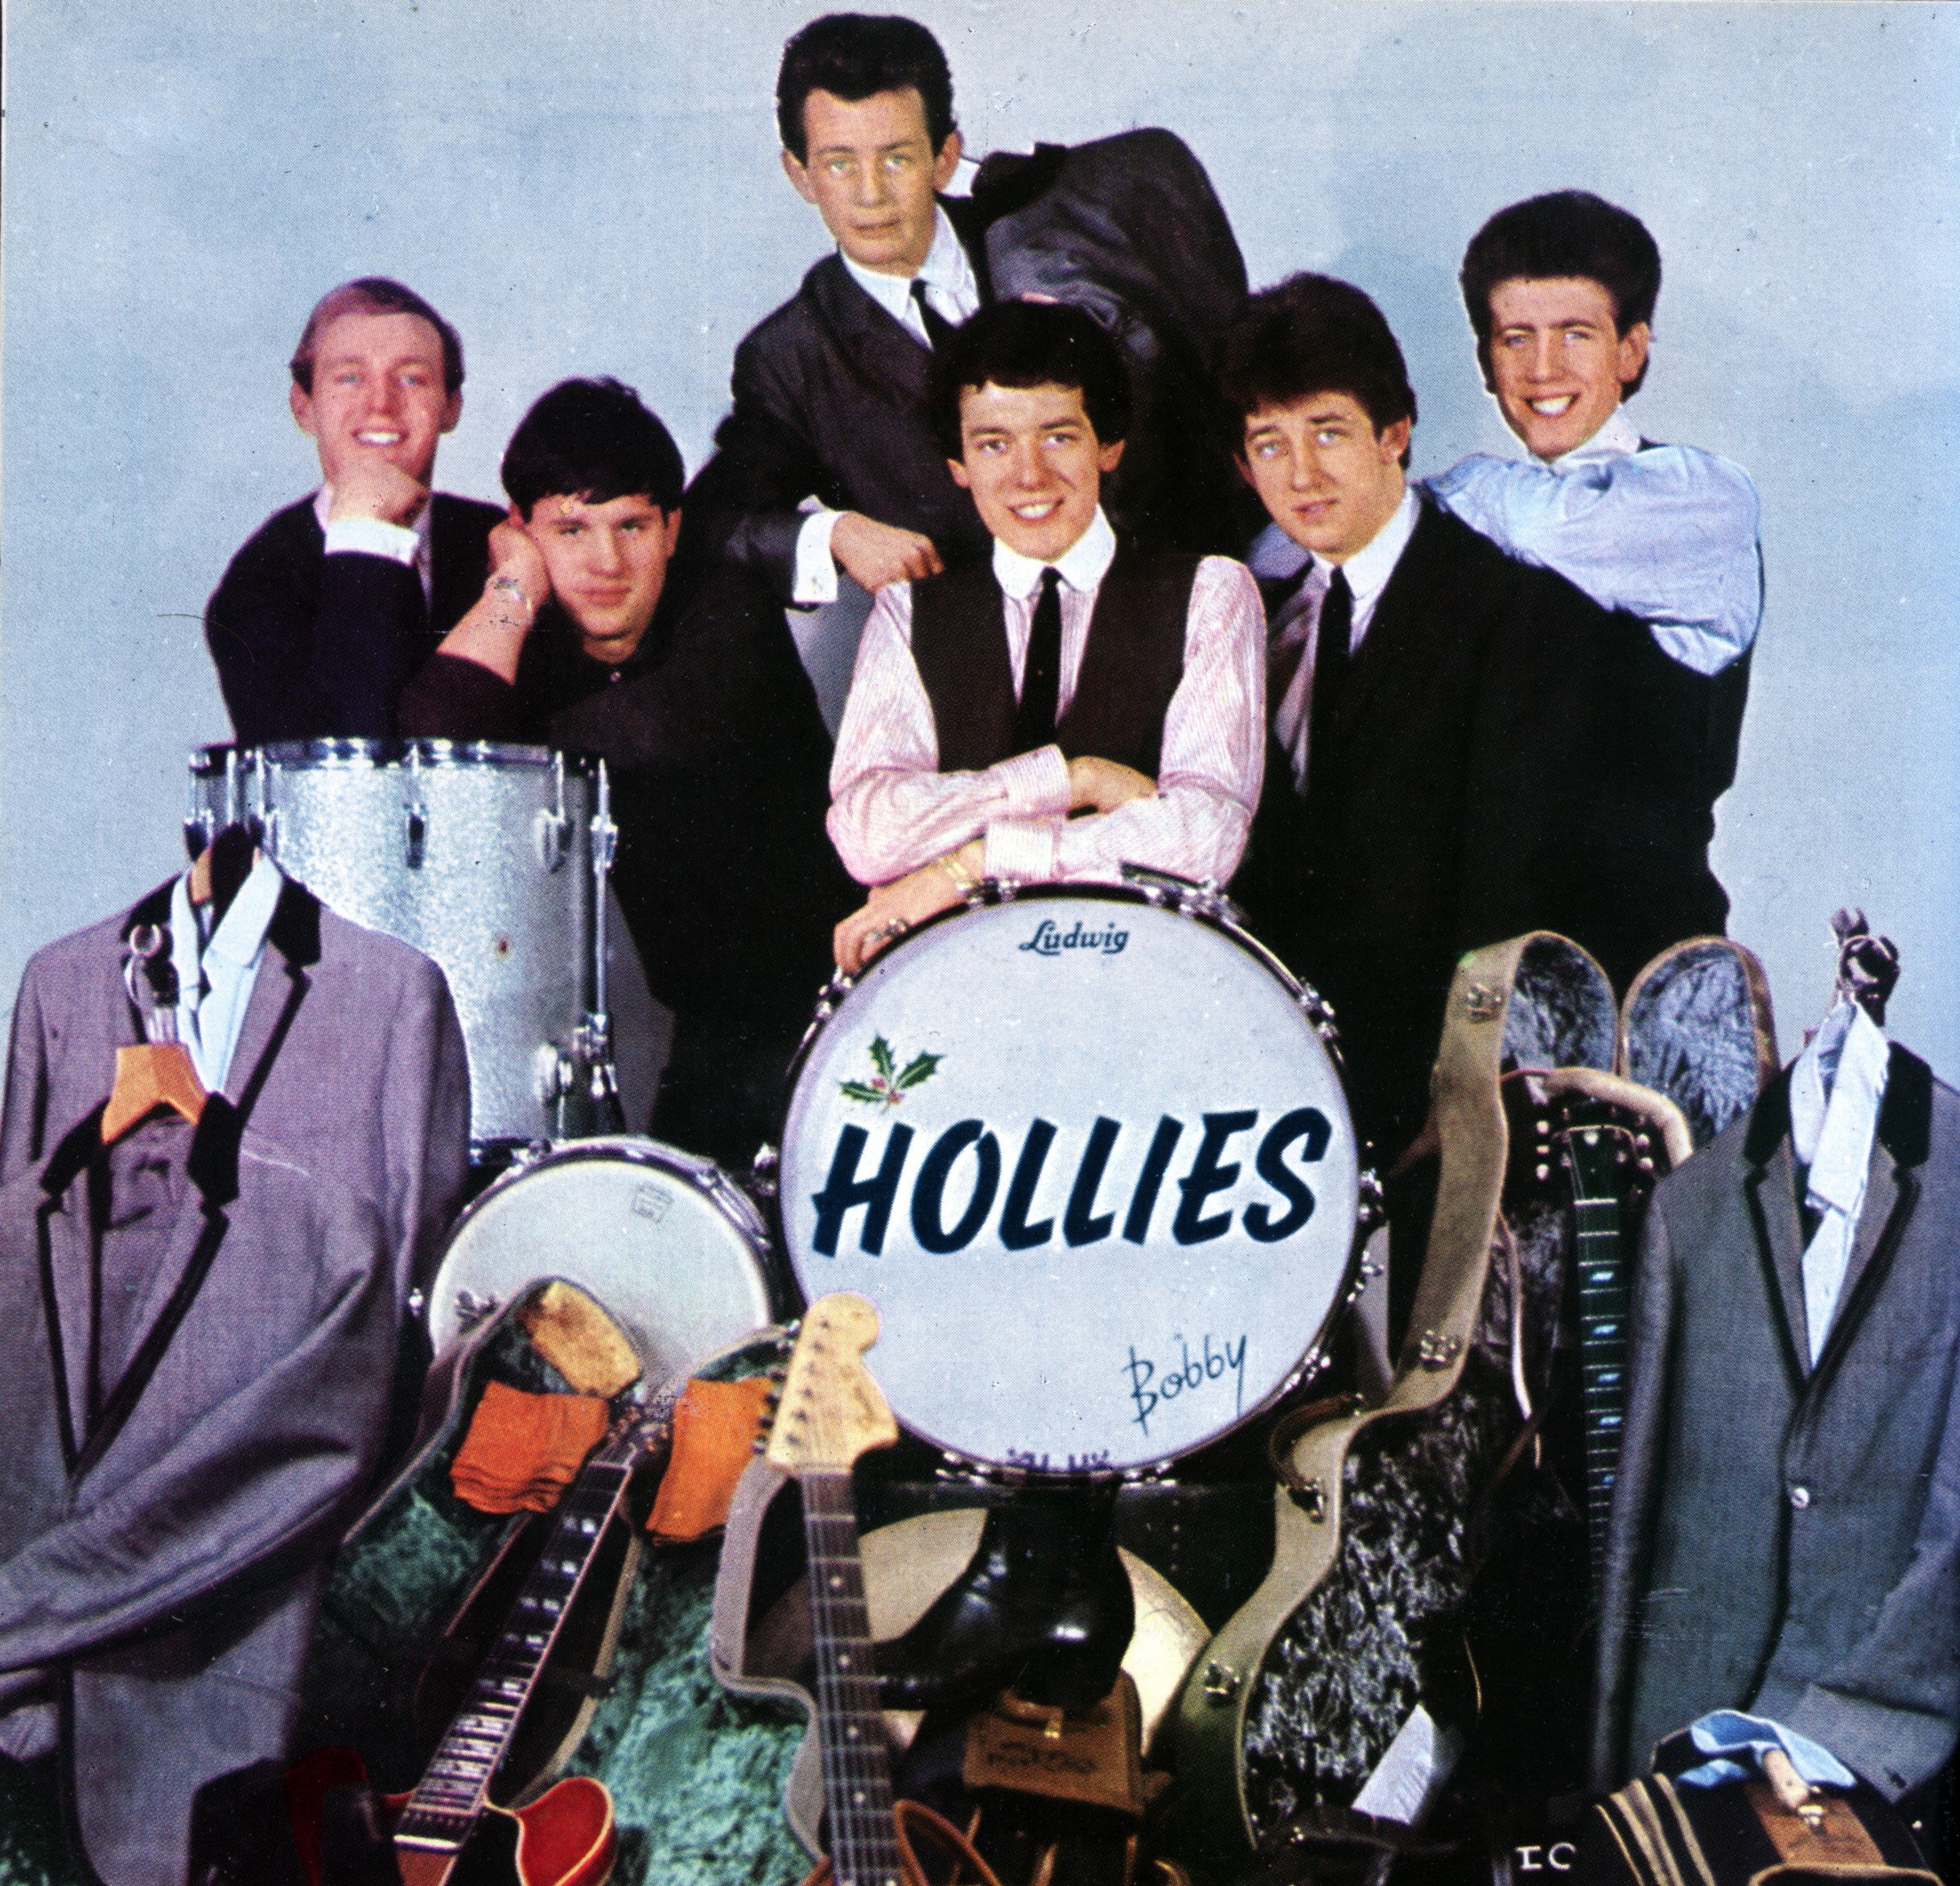 The Hollies with a drum set